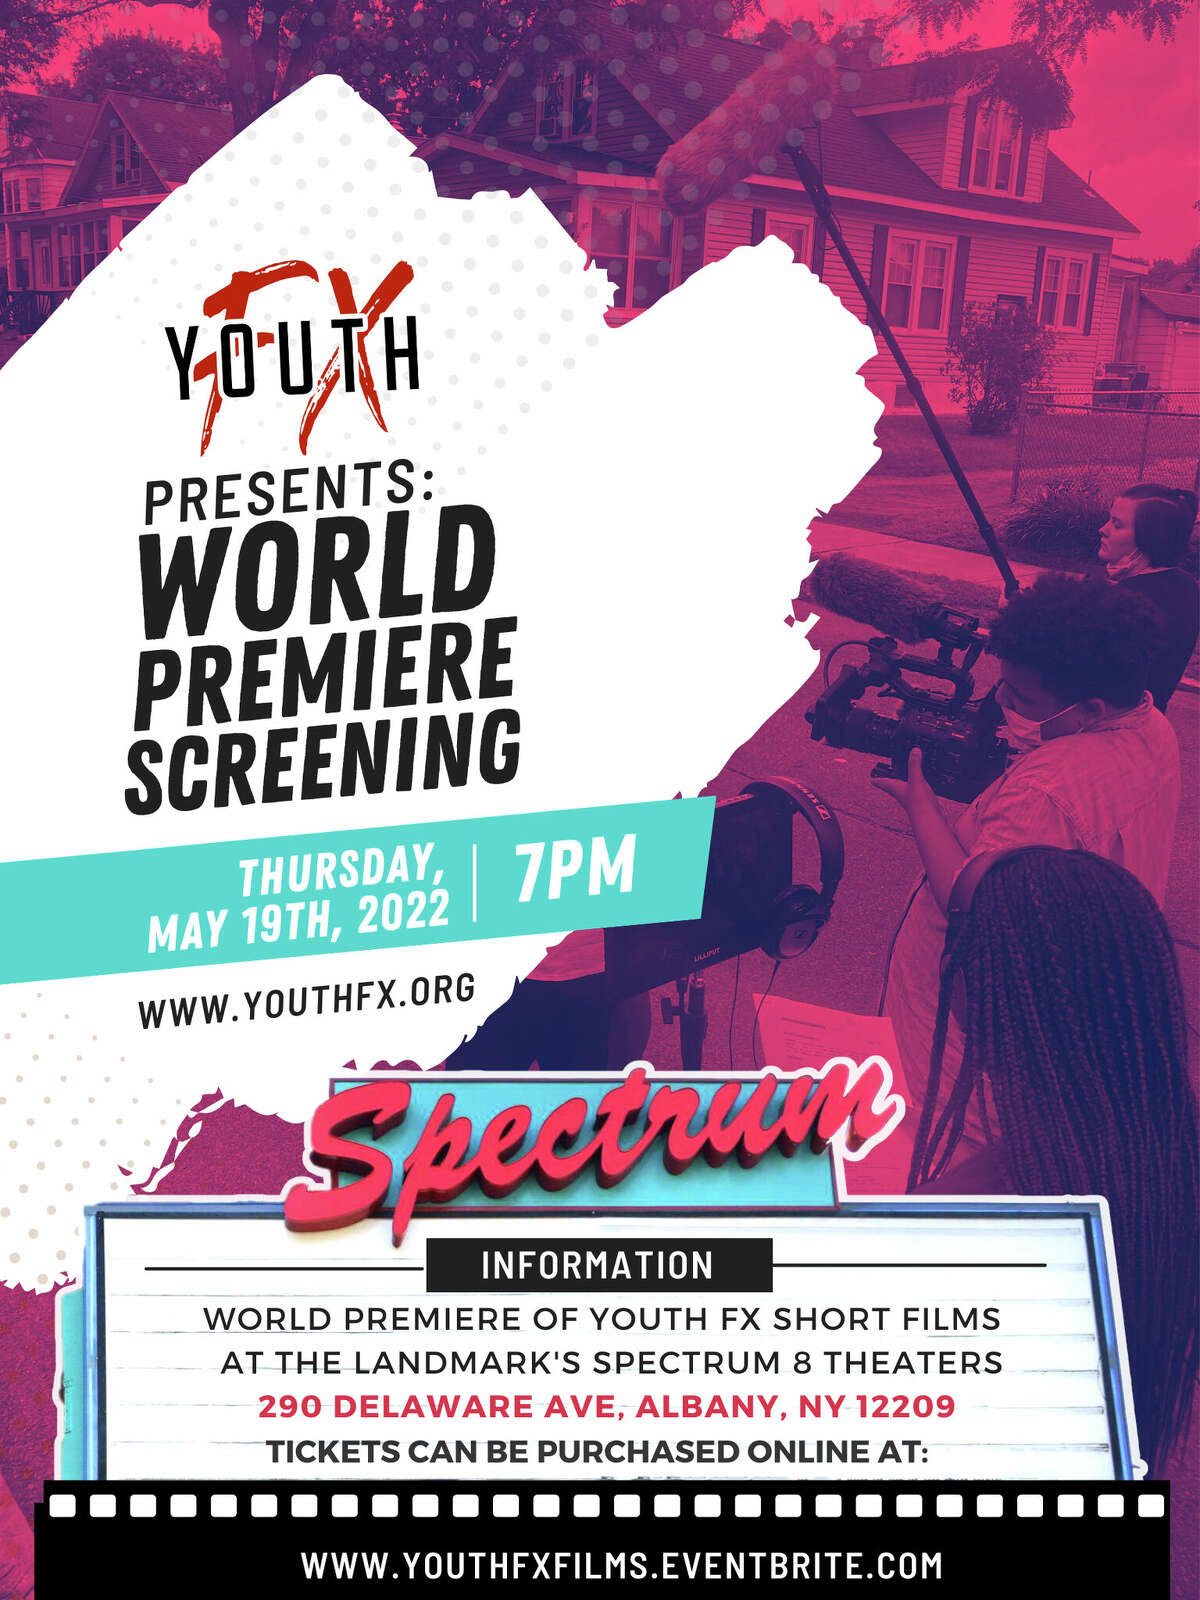 The poster for one of two screenings of movies by young Albany filmmakers and digital artists, being presented on May 19 and 24 at Landmark's Spectrum 8 Theatres in Albany by Youth FX.